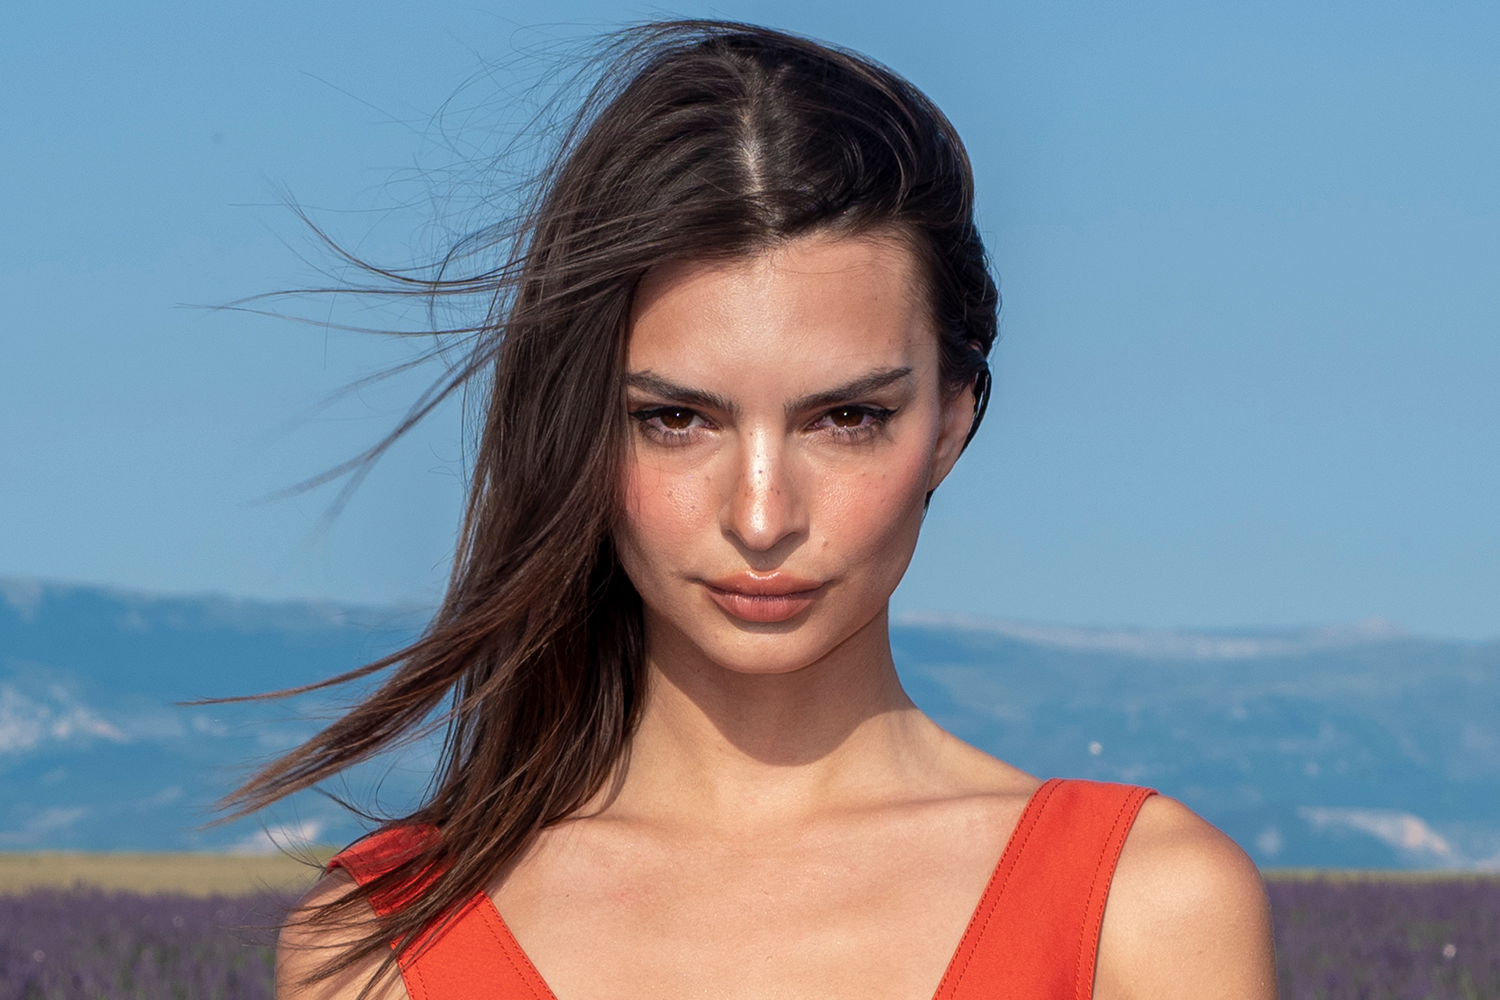 Forget Blurred Lines, We Love Emily Ratajkowski For Her 